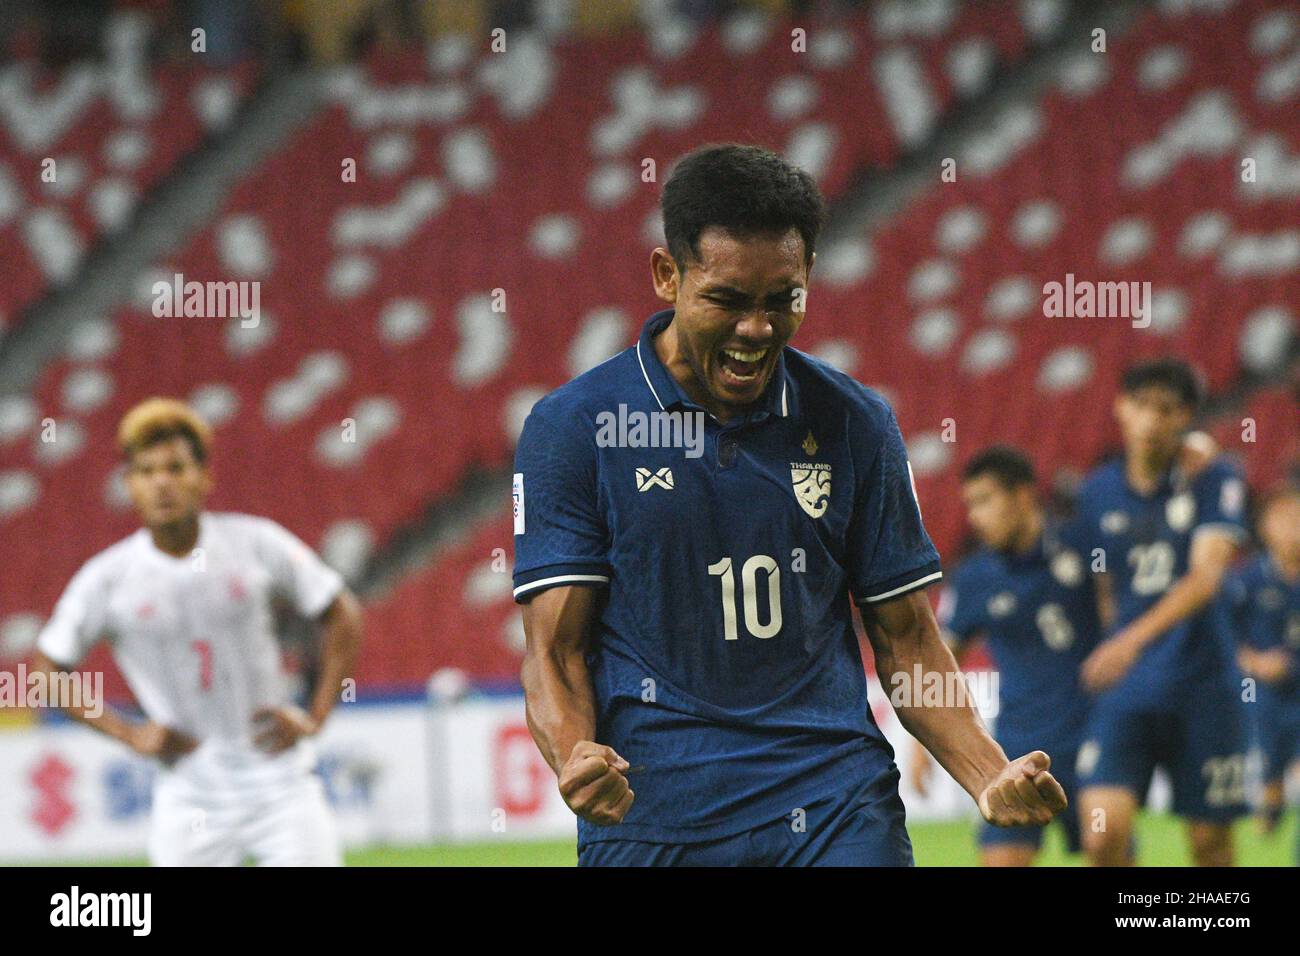 Singapore. 11th Dec, 2021. Teerasil Dangda of Thailand celebrates after  scoring during the ASEAN Football Federation (AFF) Suzuki Cup 2020 group A  match between Thailand and Myanmar at Singapore's National Stadium in